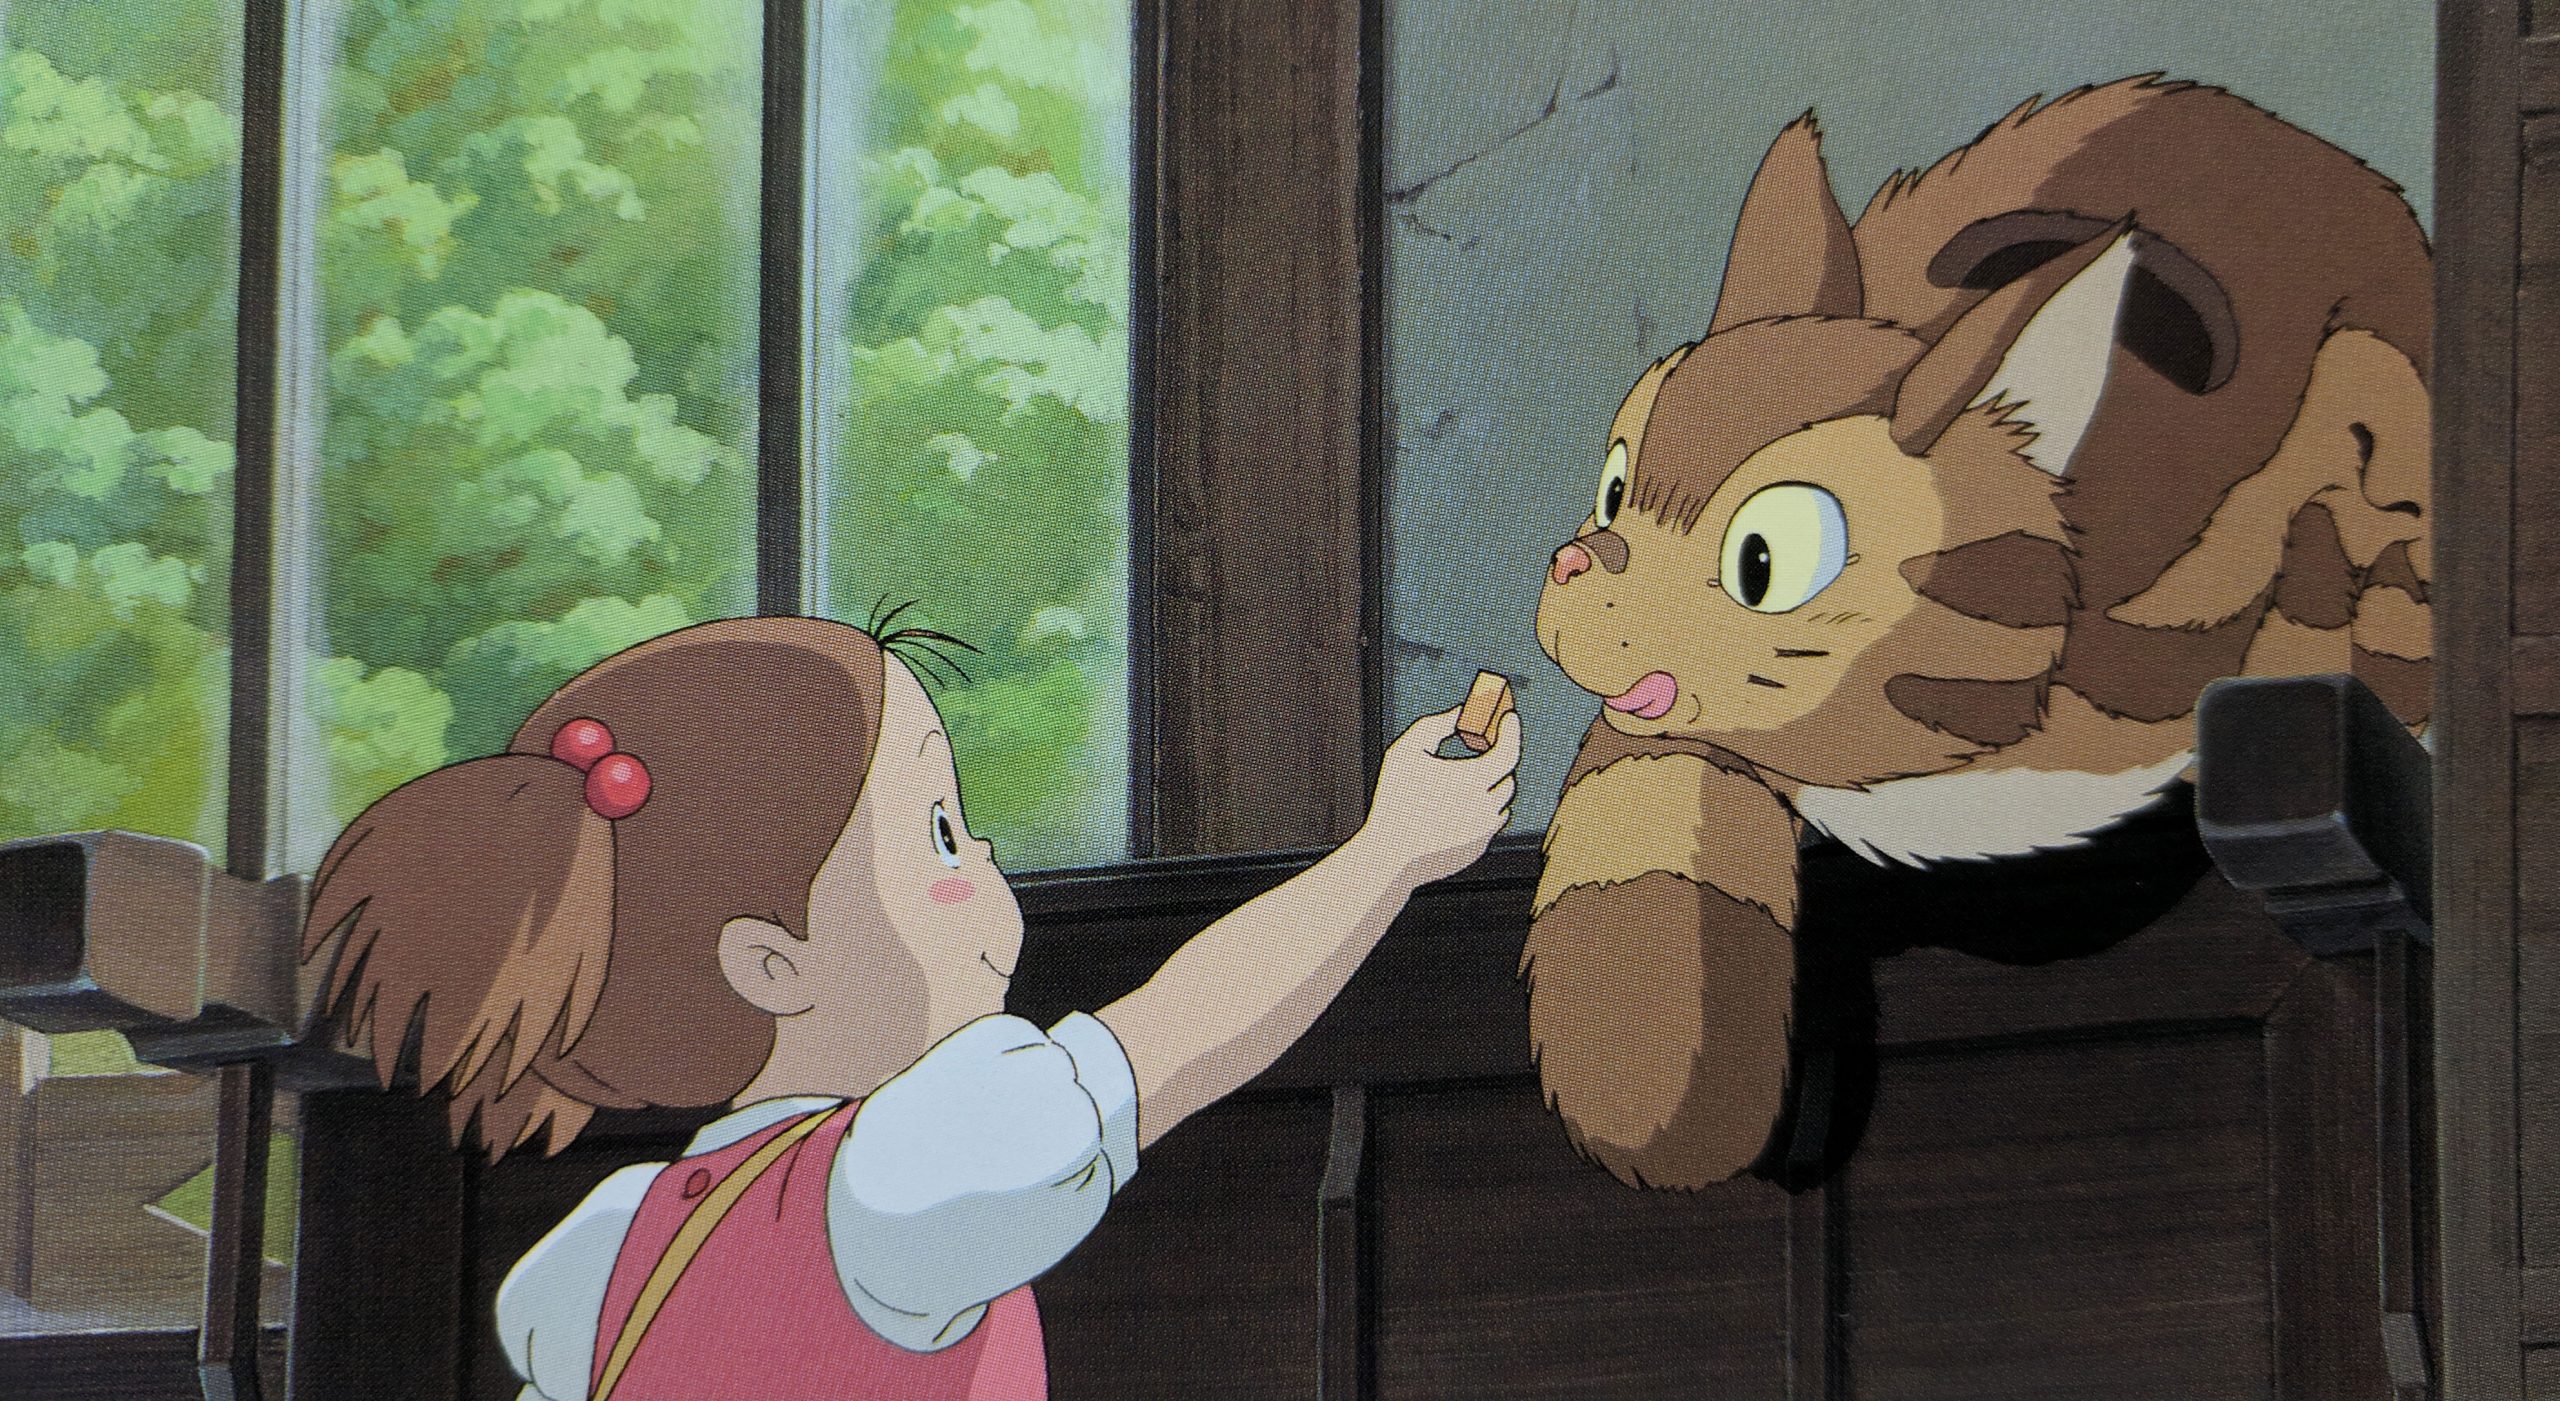 There is a Sequel to "My Neighbor Totoro" that can Only be Seen in Japan